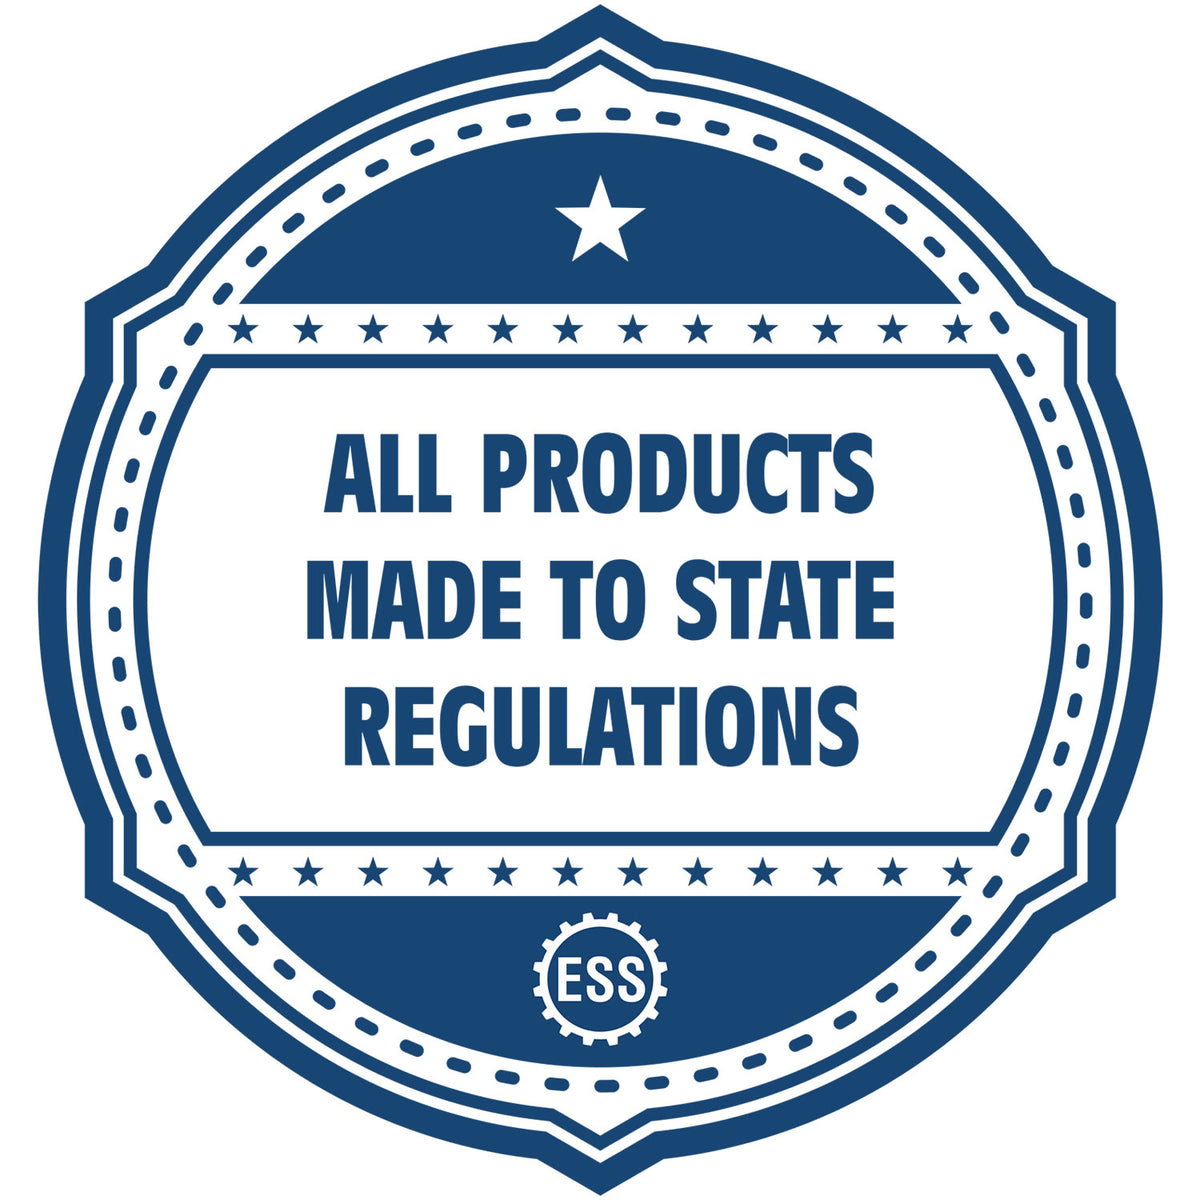 An icon or badge element for the South Carolina Professional Engineer Seal Stamp showing that this product is made in compliance with state regulations.